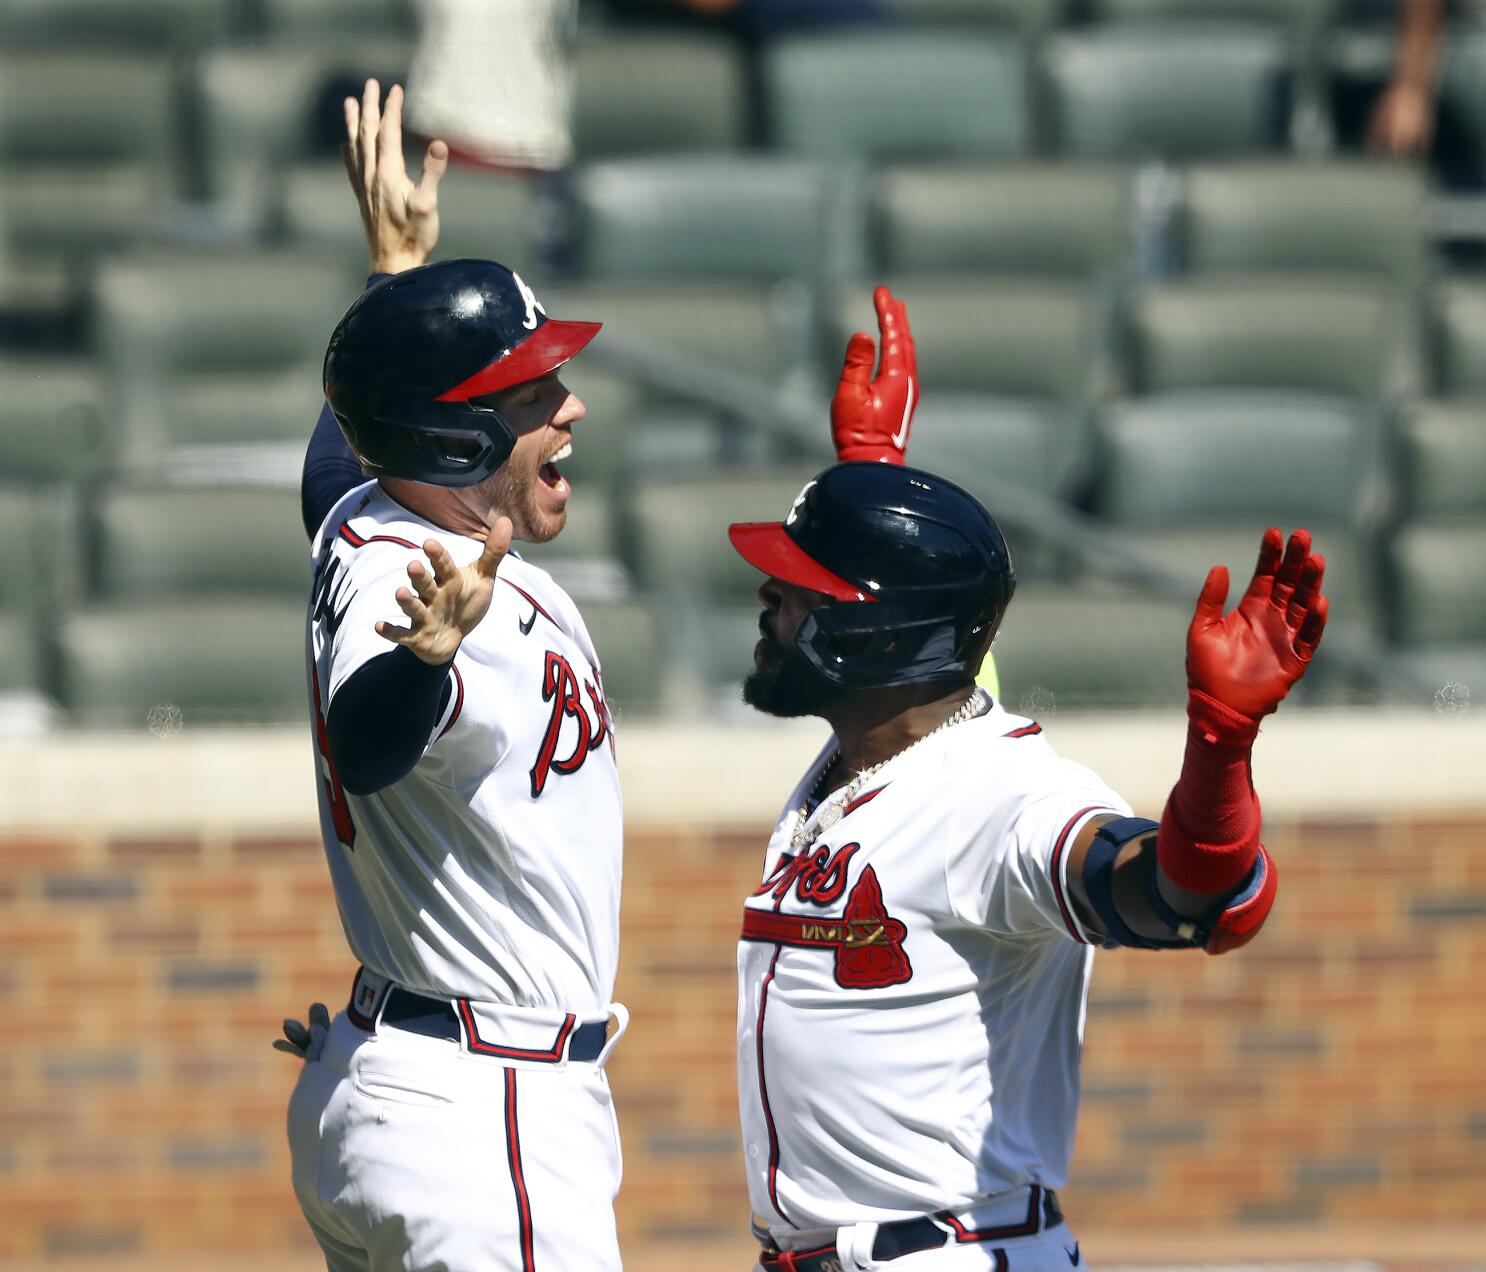 Braves win playoff series for first time since 2001